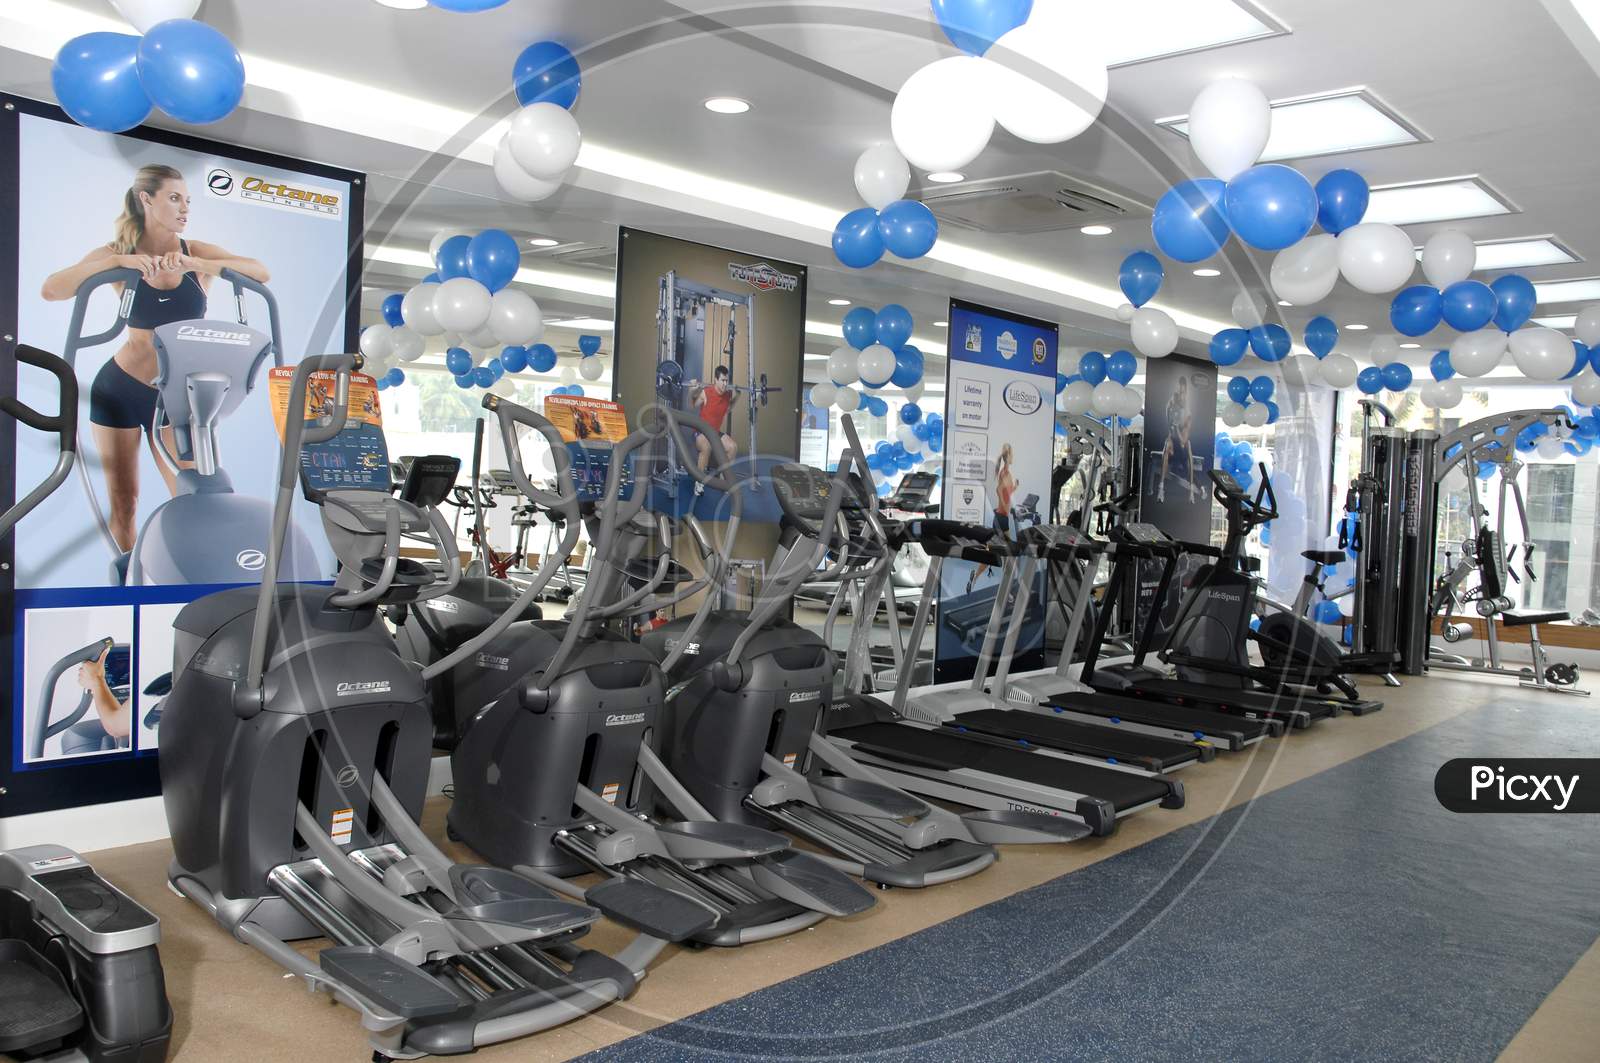 Elliptical cycling machines and treadmills in a gym